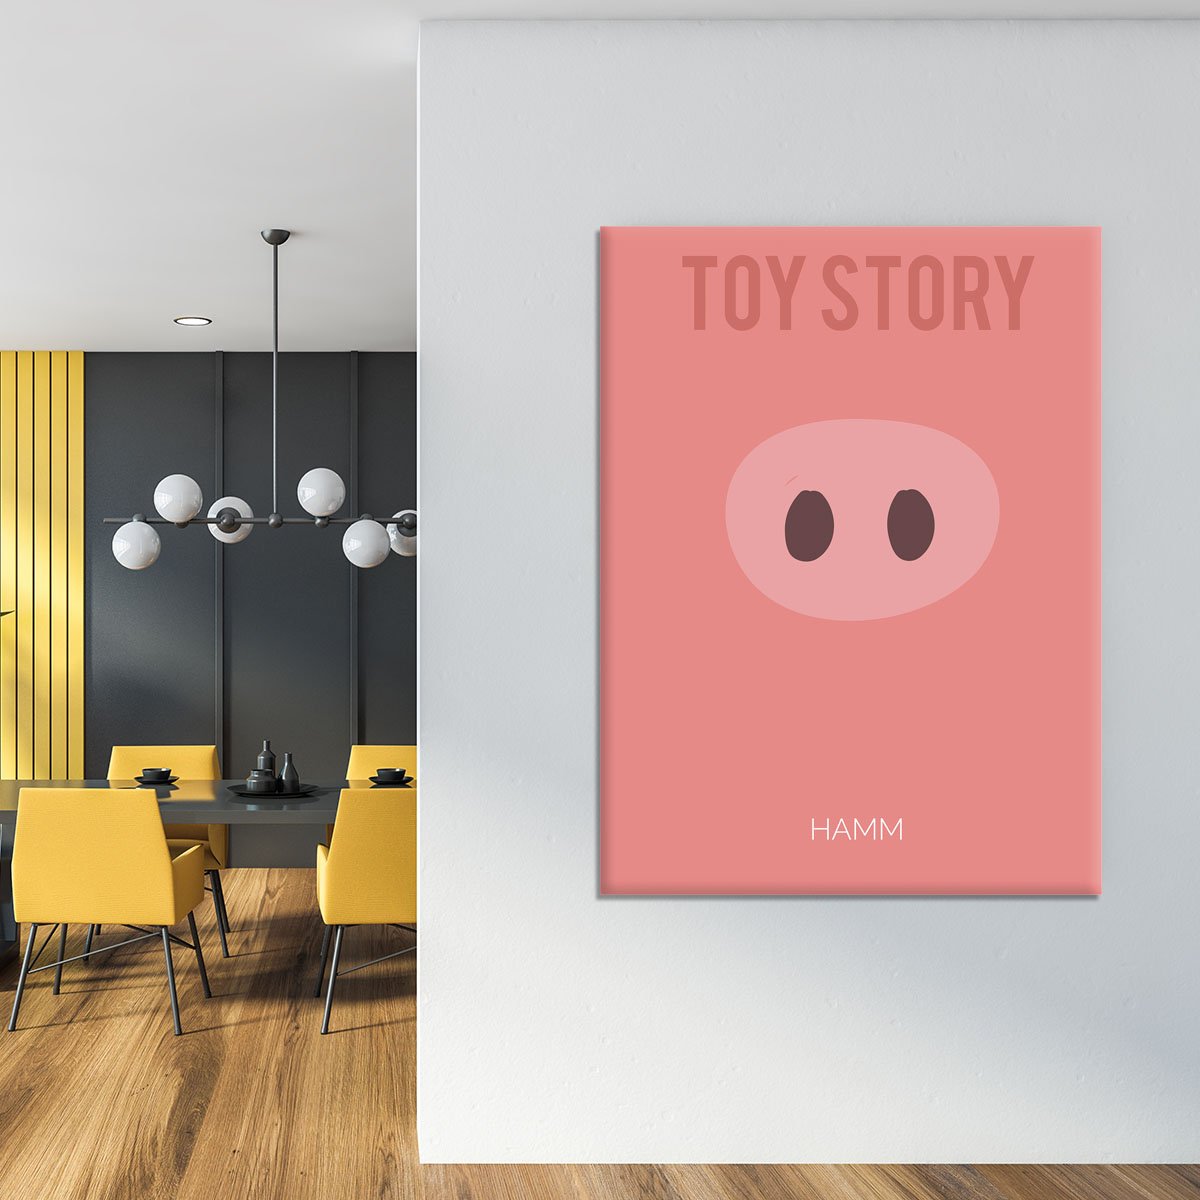 Toy Story Hamm Minimal Movie Canvas Print or Poster